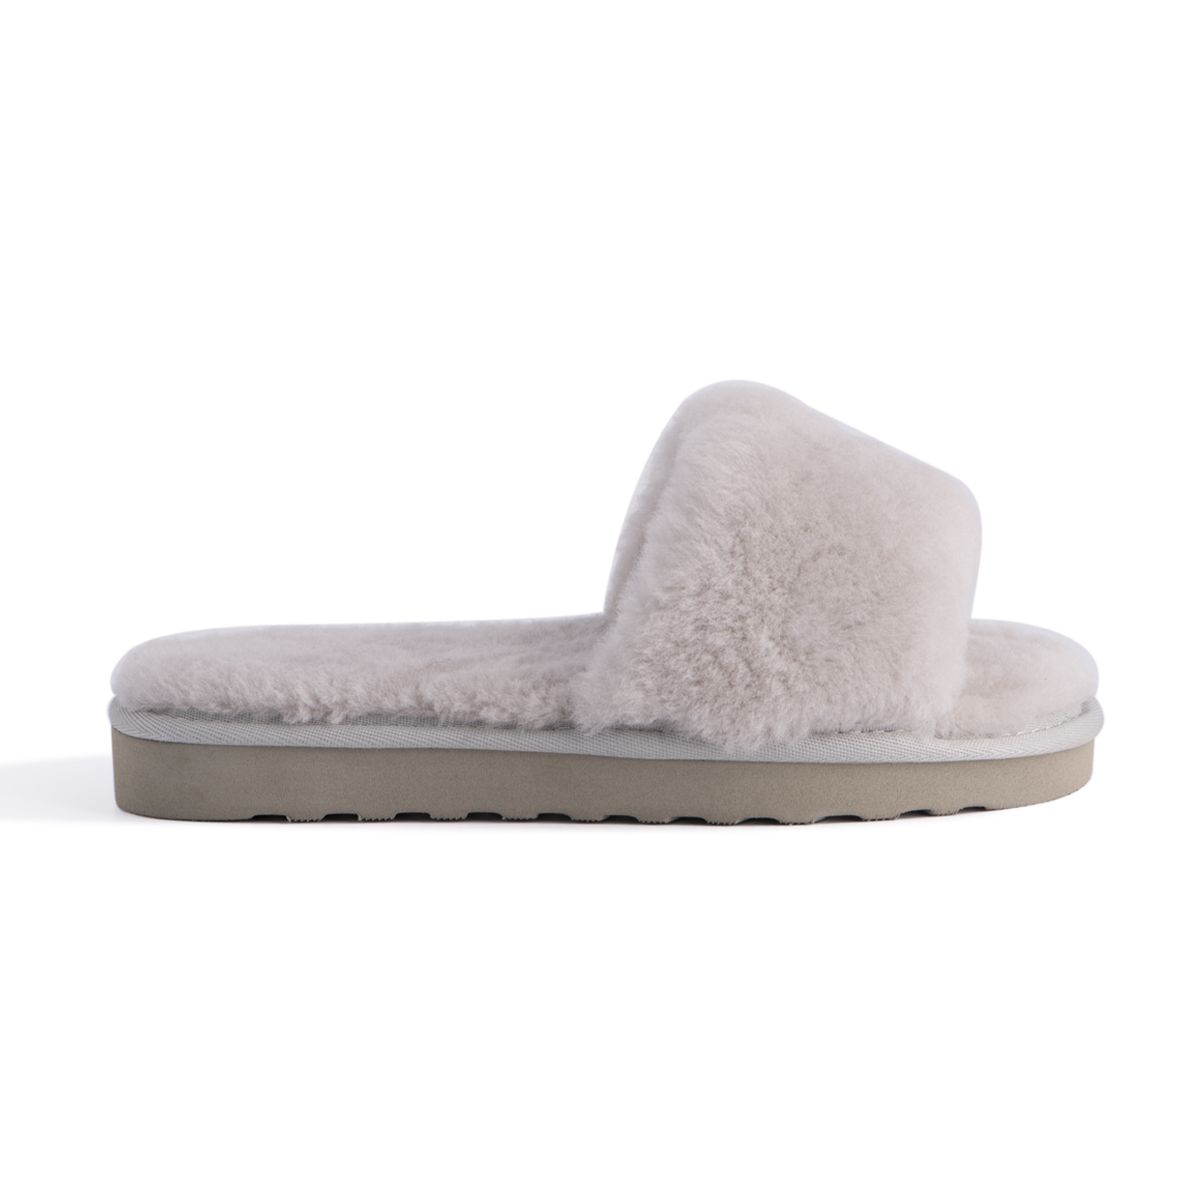 Plush premium 100% Australian sheepskin lining encompassing the whole slipper, allowing extra cushioning
Fine craftsmanship
Rubber base outsole that is both flexible and durable, also prevents slipping on wet surfaces
Provide extra warmth and would be the top choice to travel with, perfect to pair with your favourite PJs
100% brand new and high quality, comes in a branded box, suitable for gift